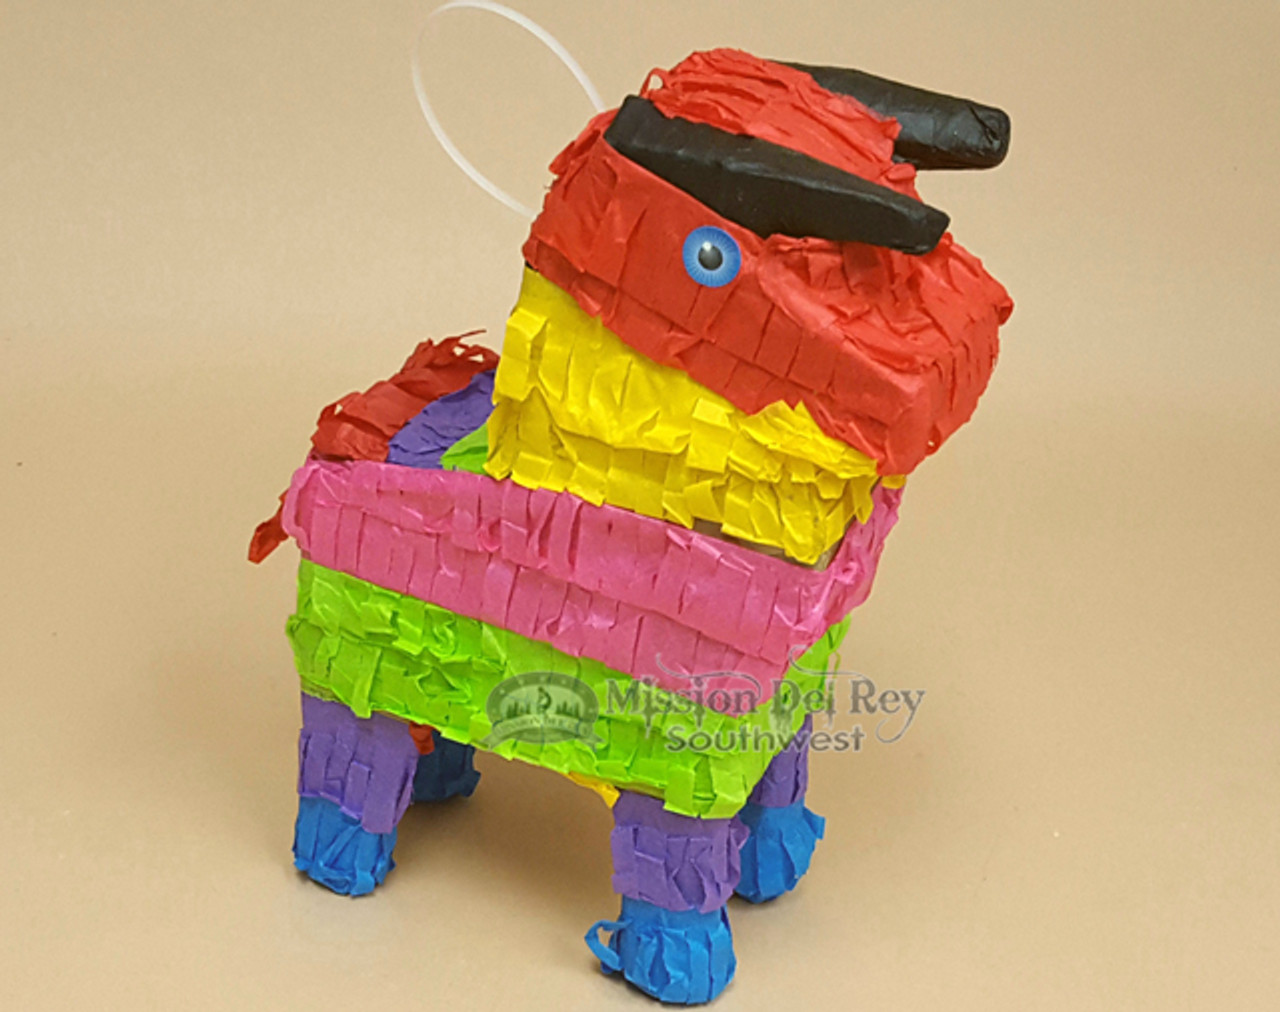 Colorful Hand Made Mexican Pinata 11 -Bull (p2) - Mission Del Rey Southwest